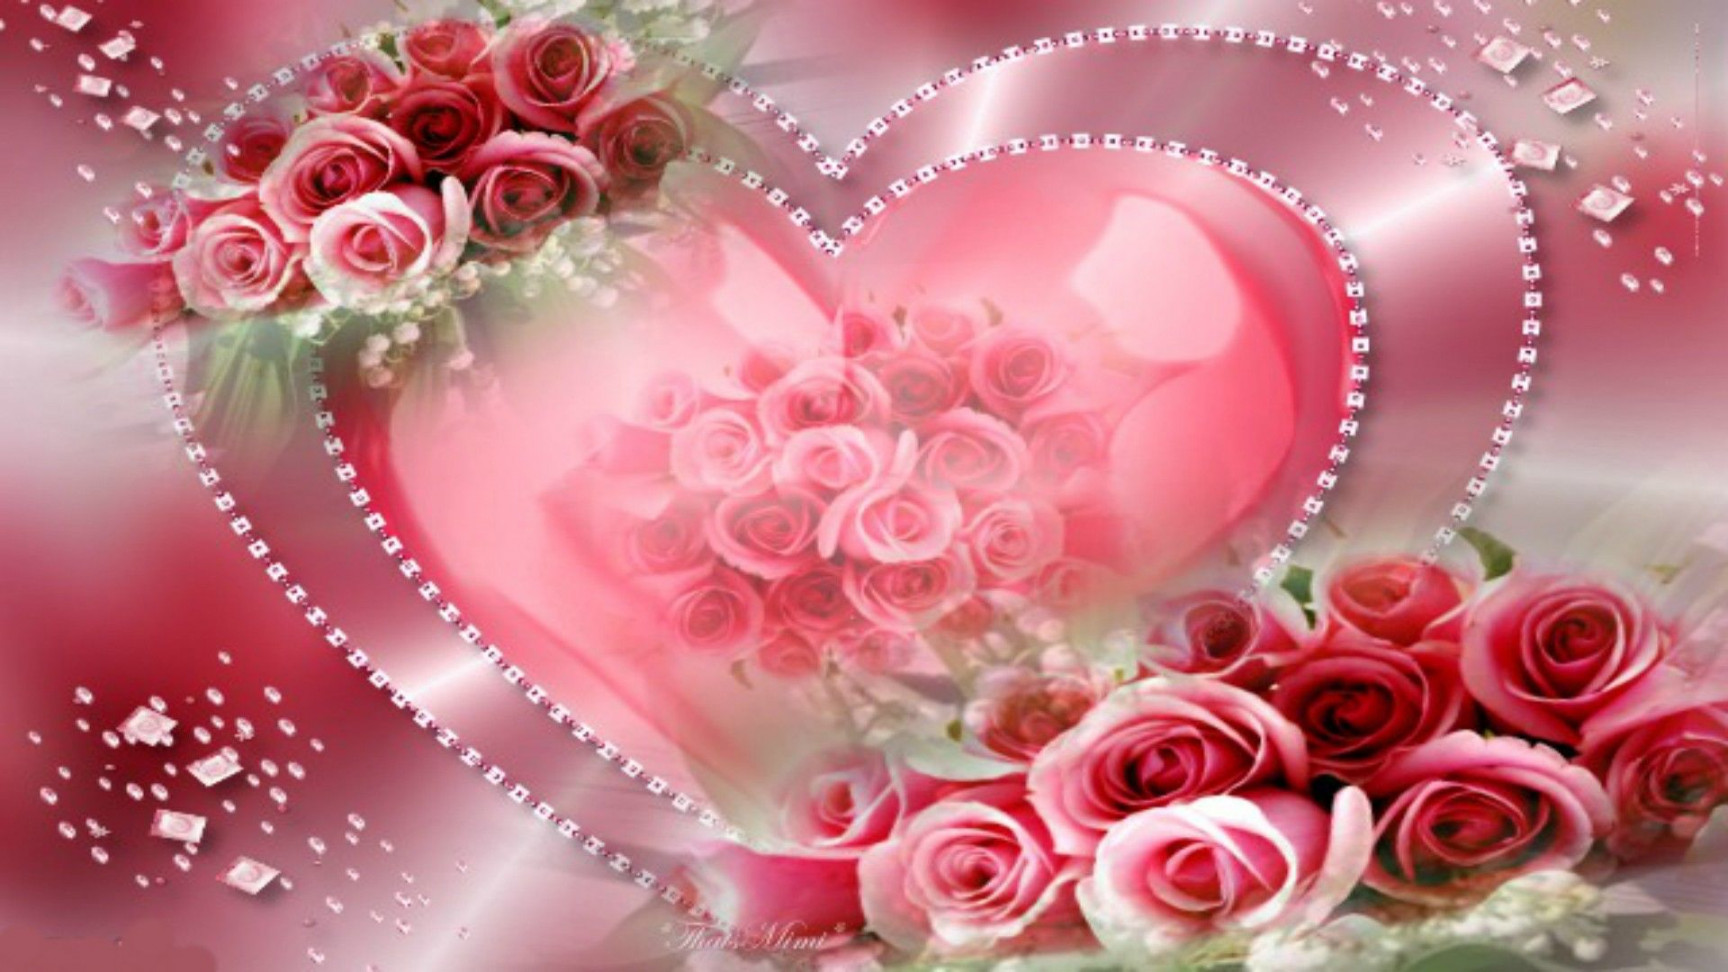 Hearts And Flowers Wallpapers For Mobile - Romantic Love Heart Rose -  1728x972 Wallpaper 